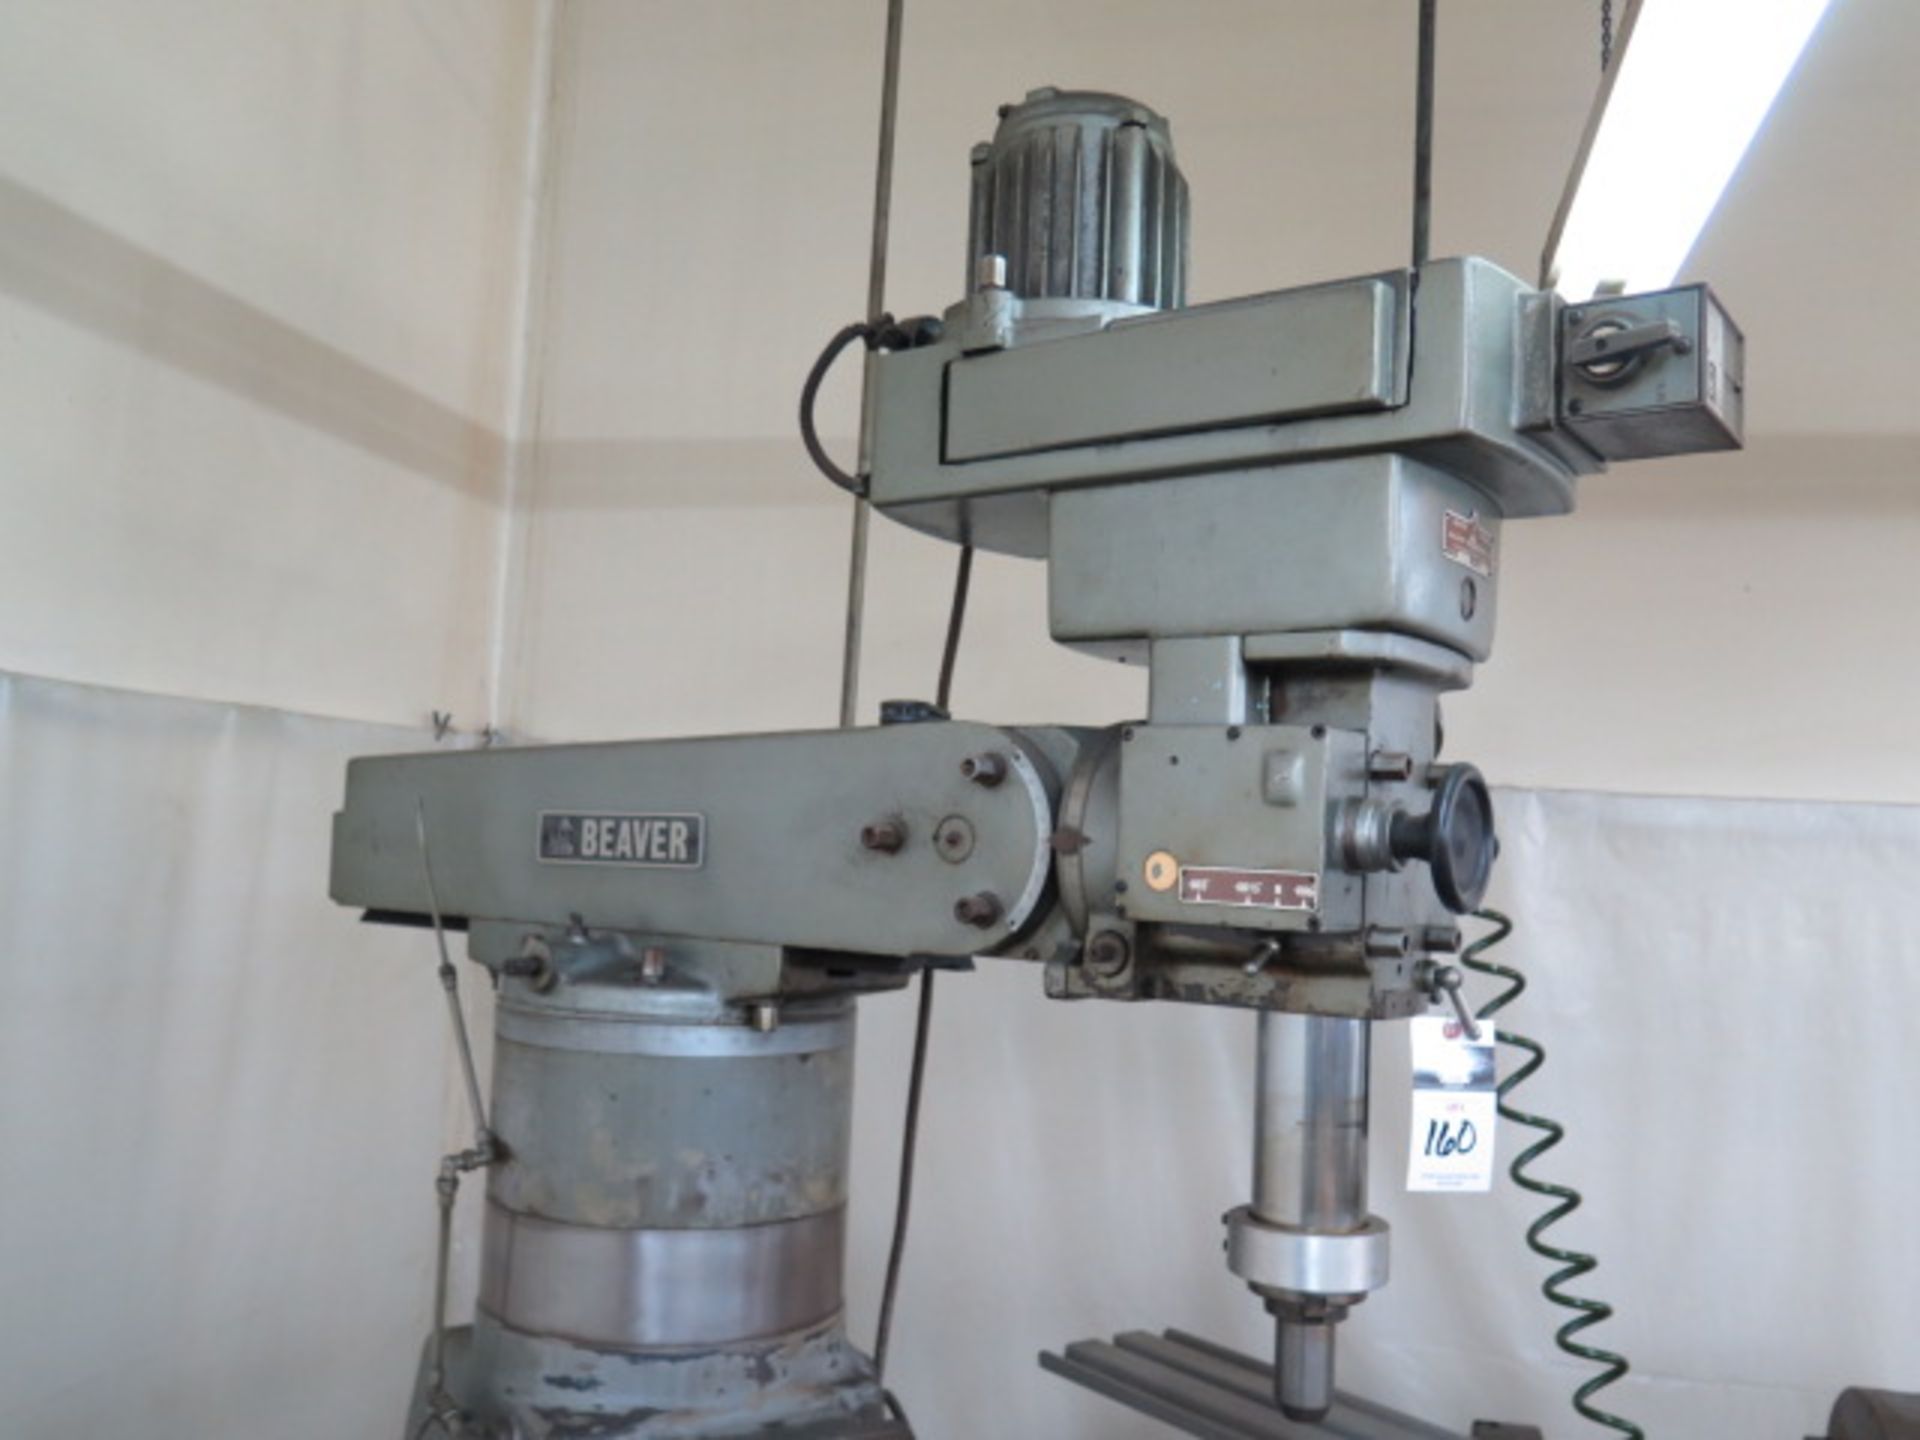 Beaver VBRP Vertical Mill s/n 4091/2 w/ 40-Taper Spindle, 10” Riser, Box Ways,Power Feed, SOLD AS IS - Image 3 of 11